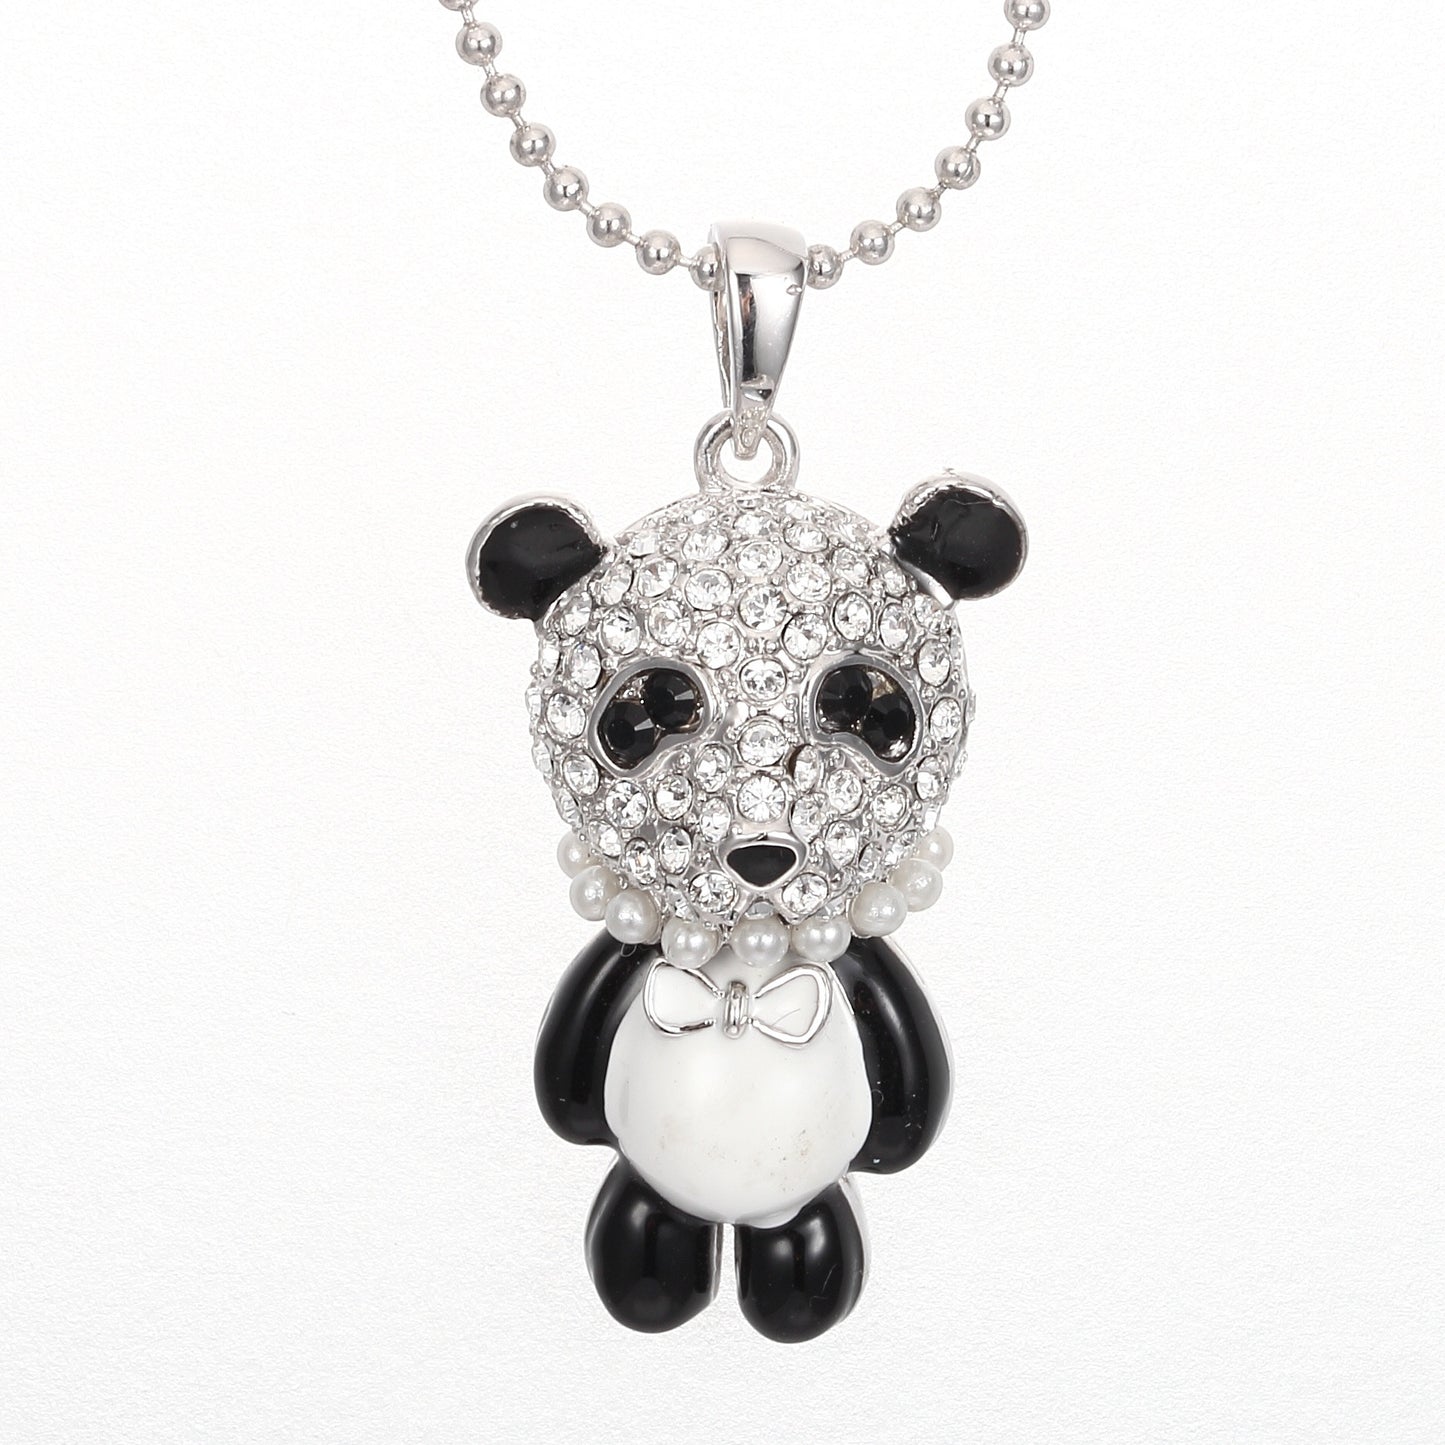 The cute little black and white panda necklace - CDE Jewelry Egypt